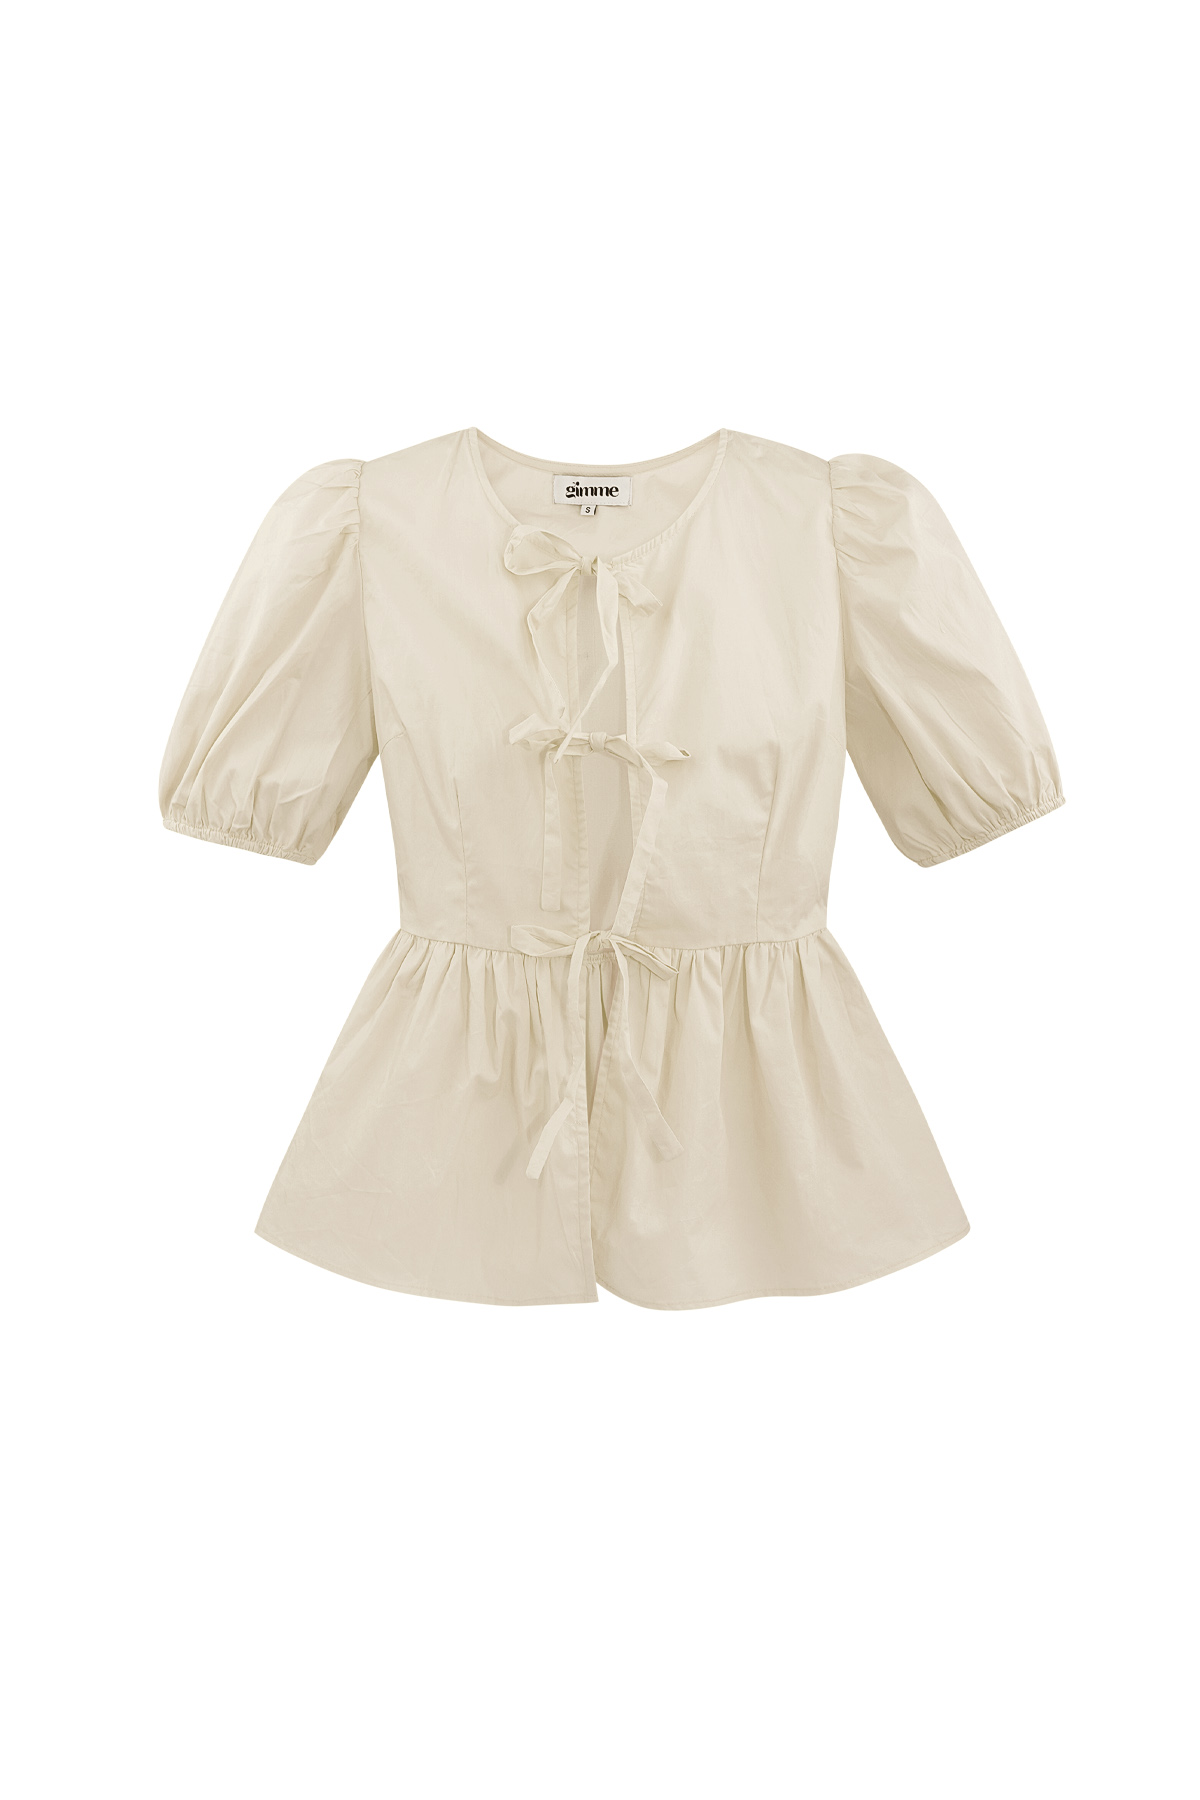 Must-have peplum blouse with bows - beige